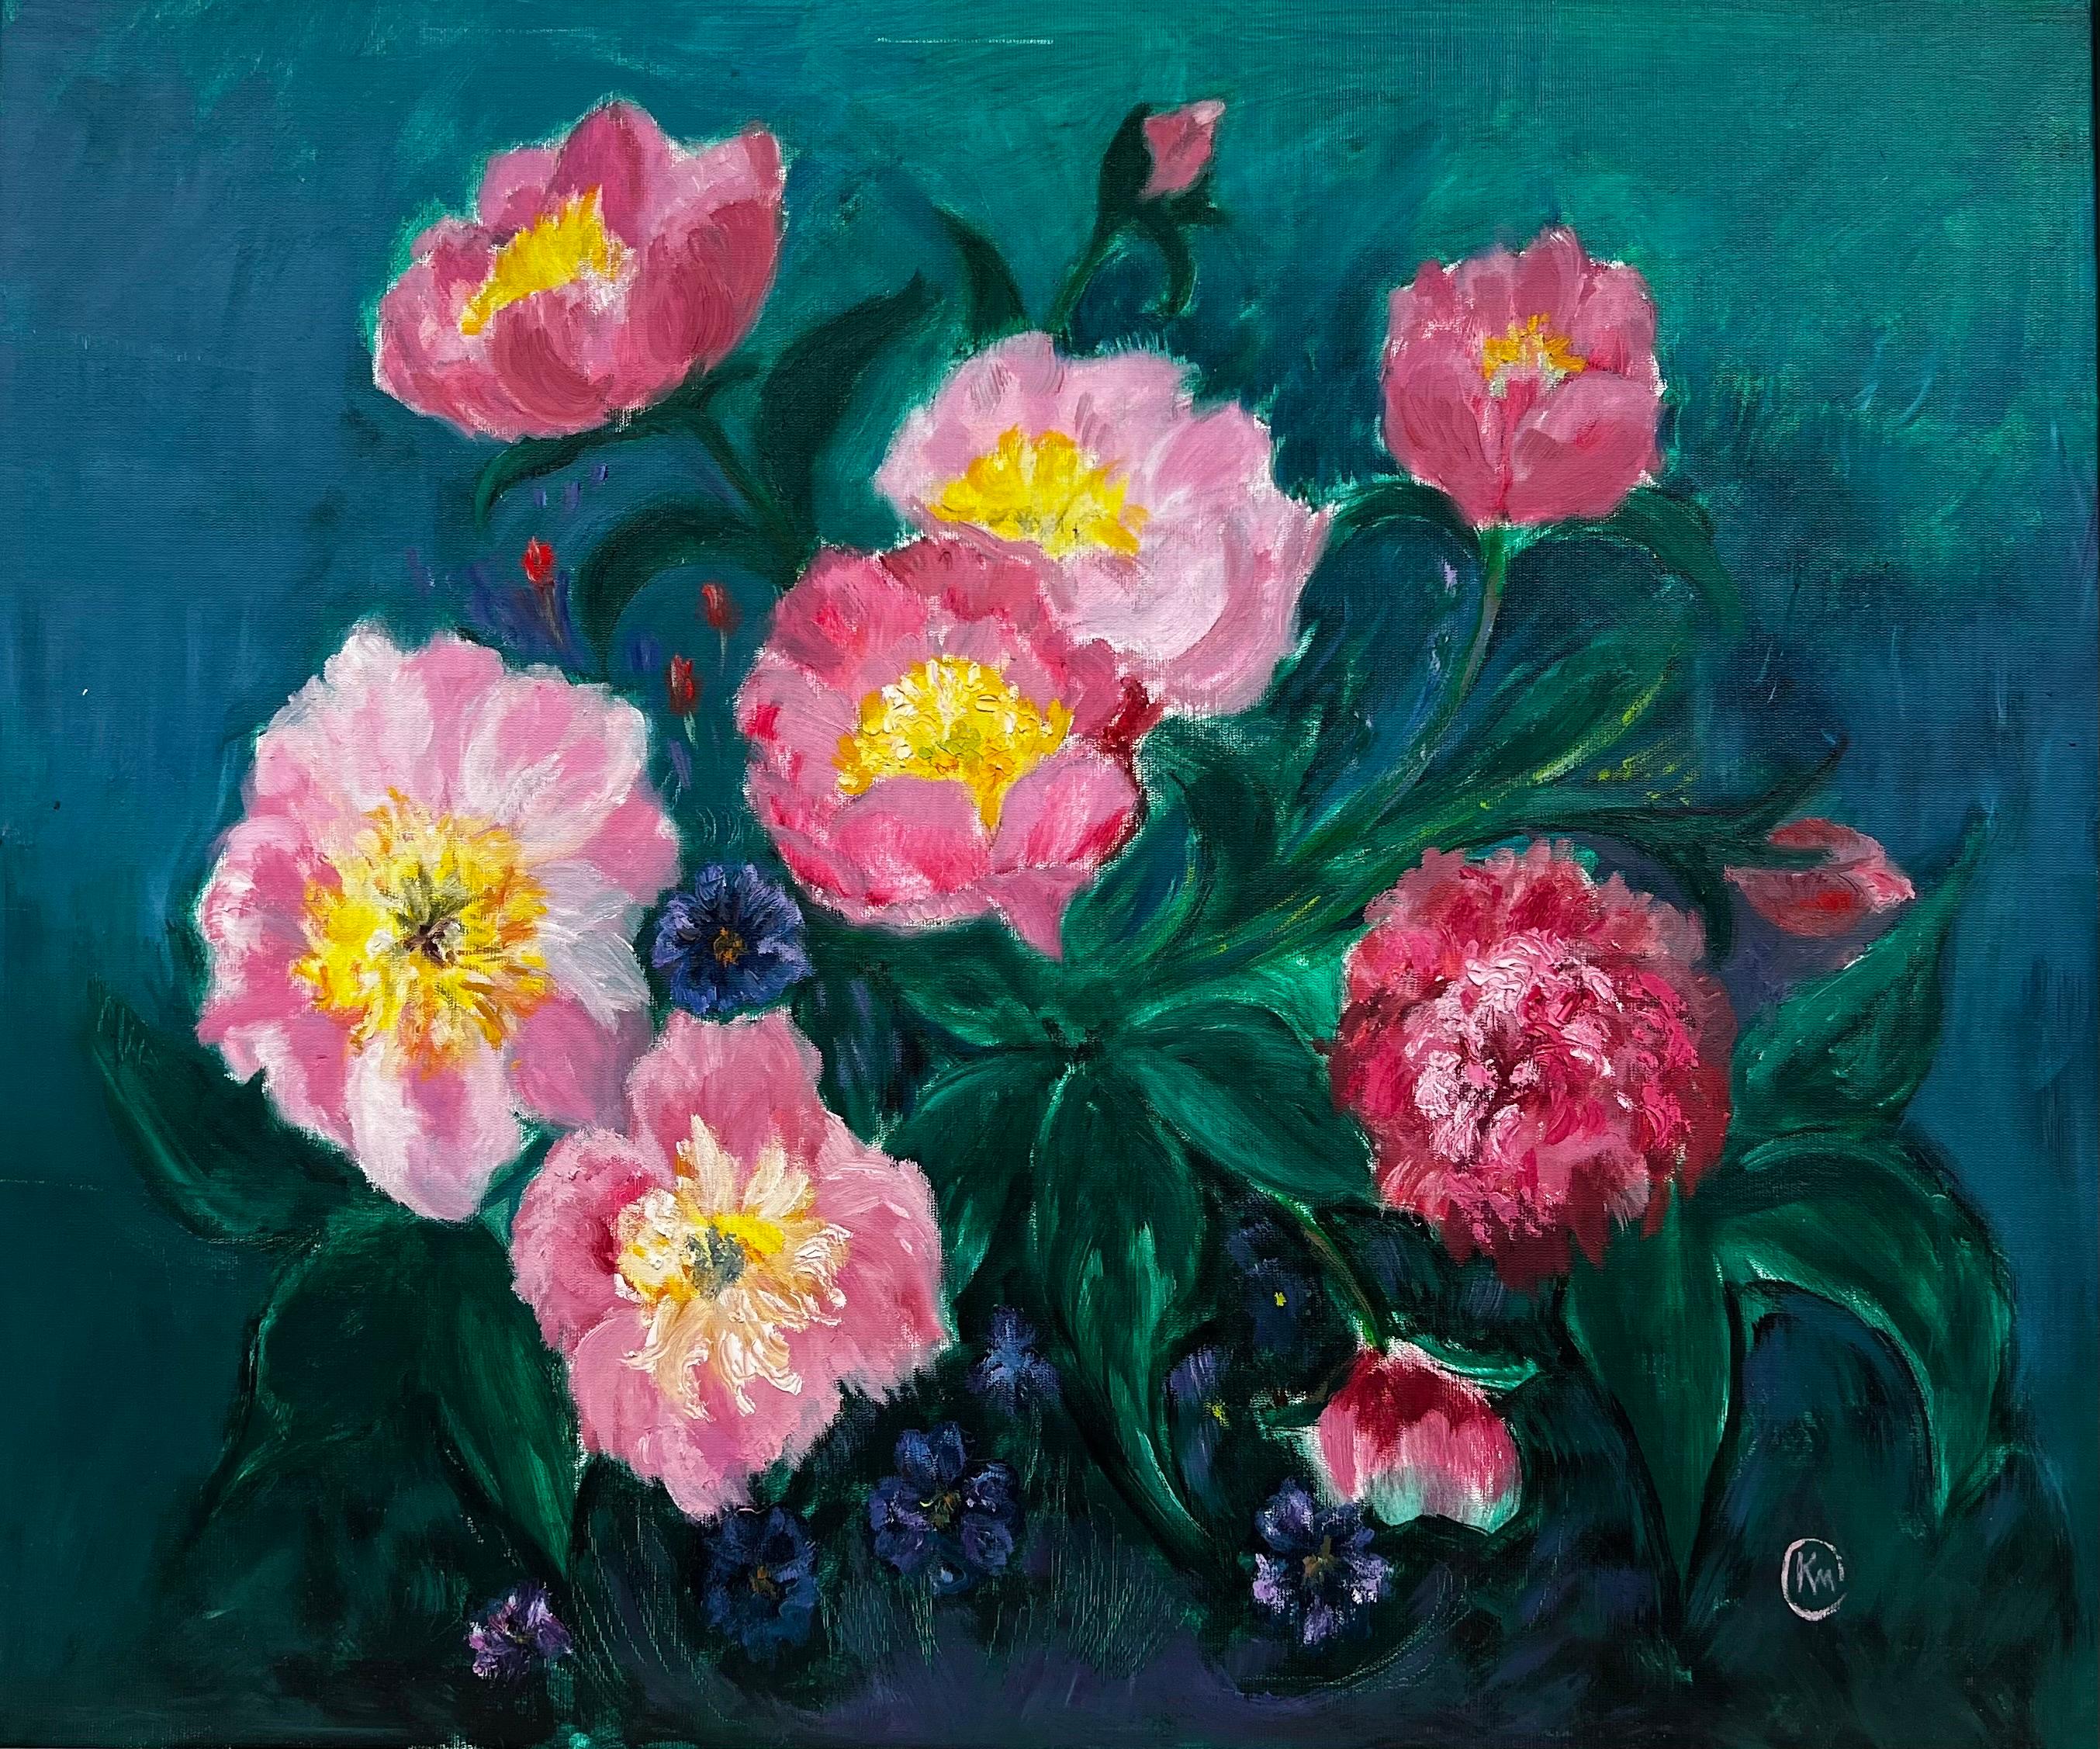 Kathleen Crow Interior Painting - Large British Contemporary Painting - Pink Flowers against Blue Background